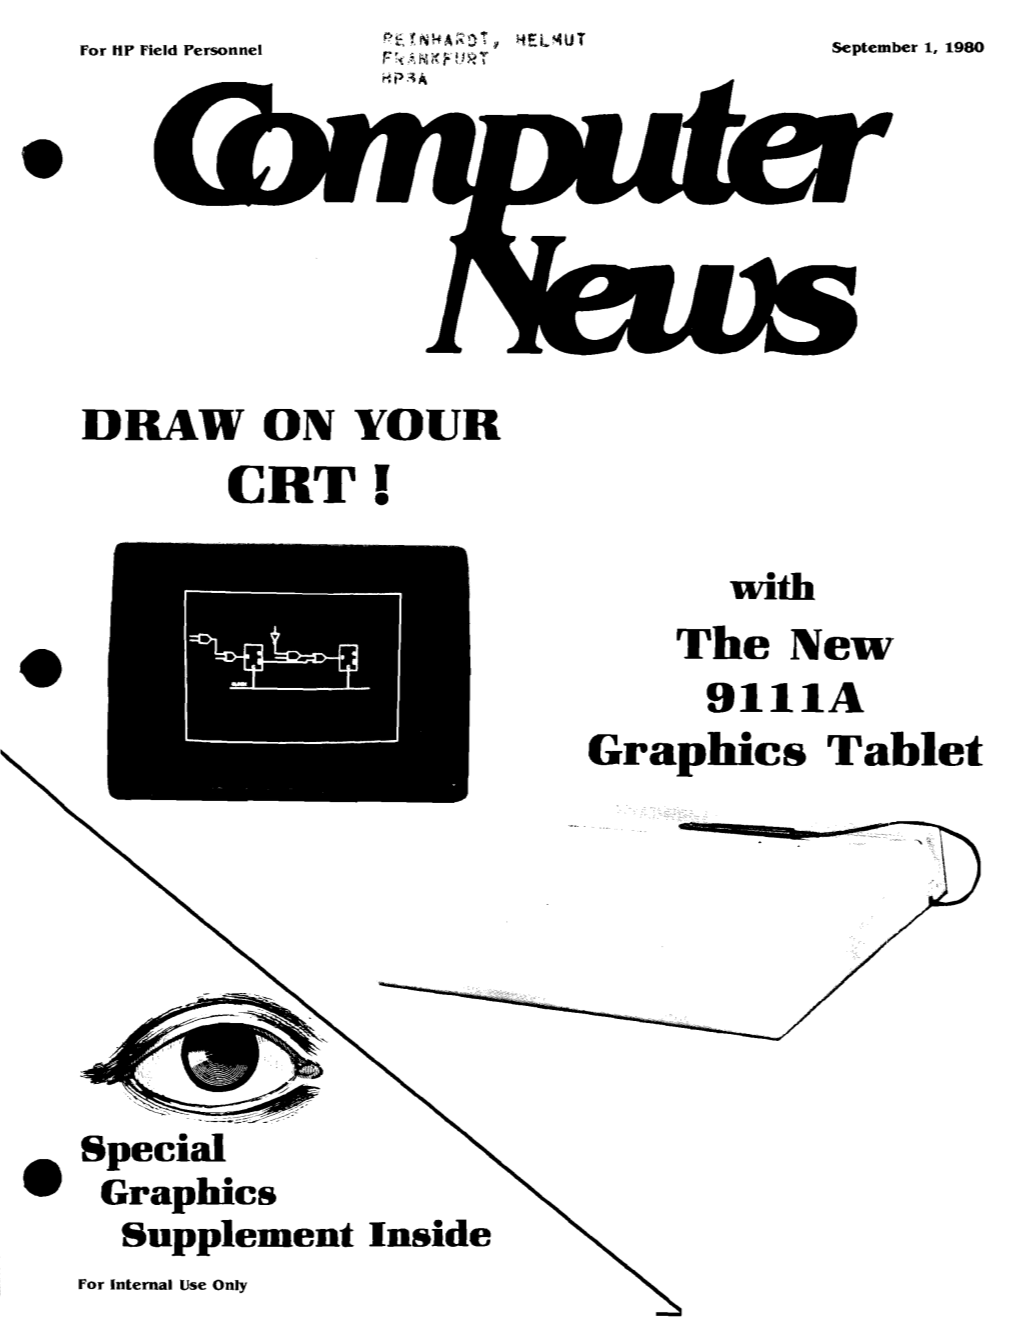 The New Graphics Tablet